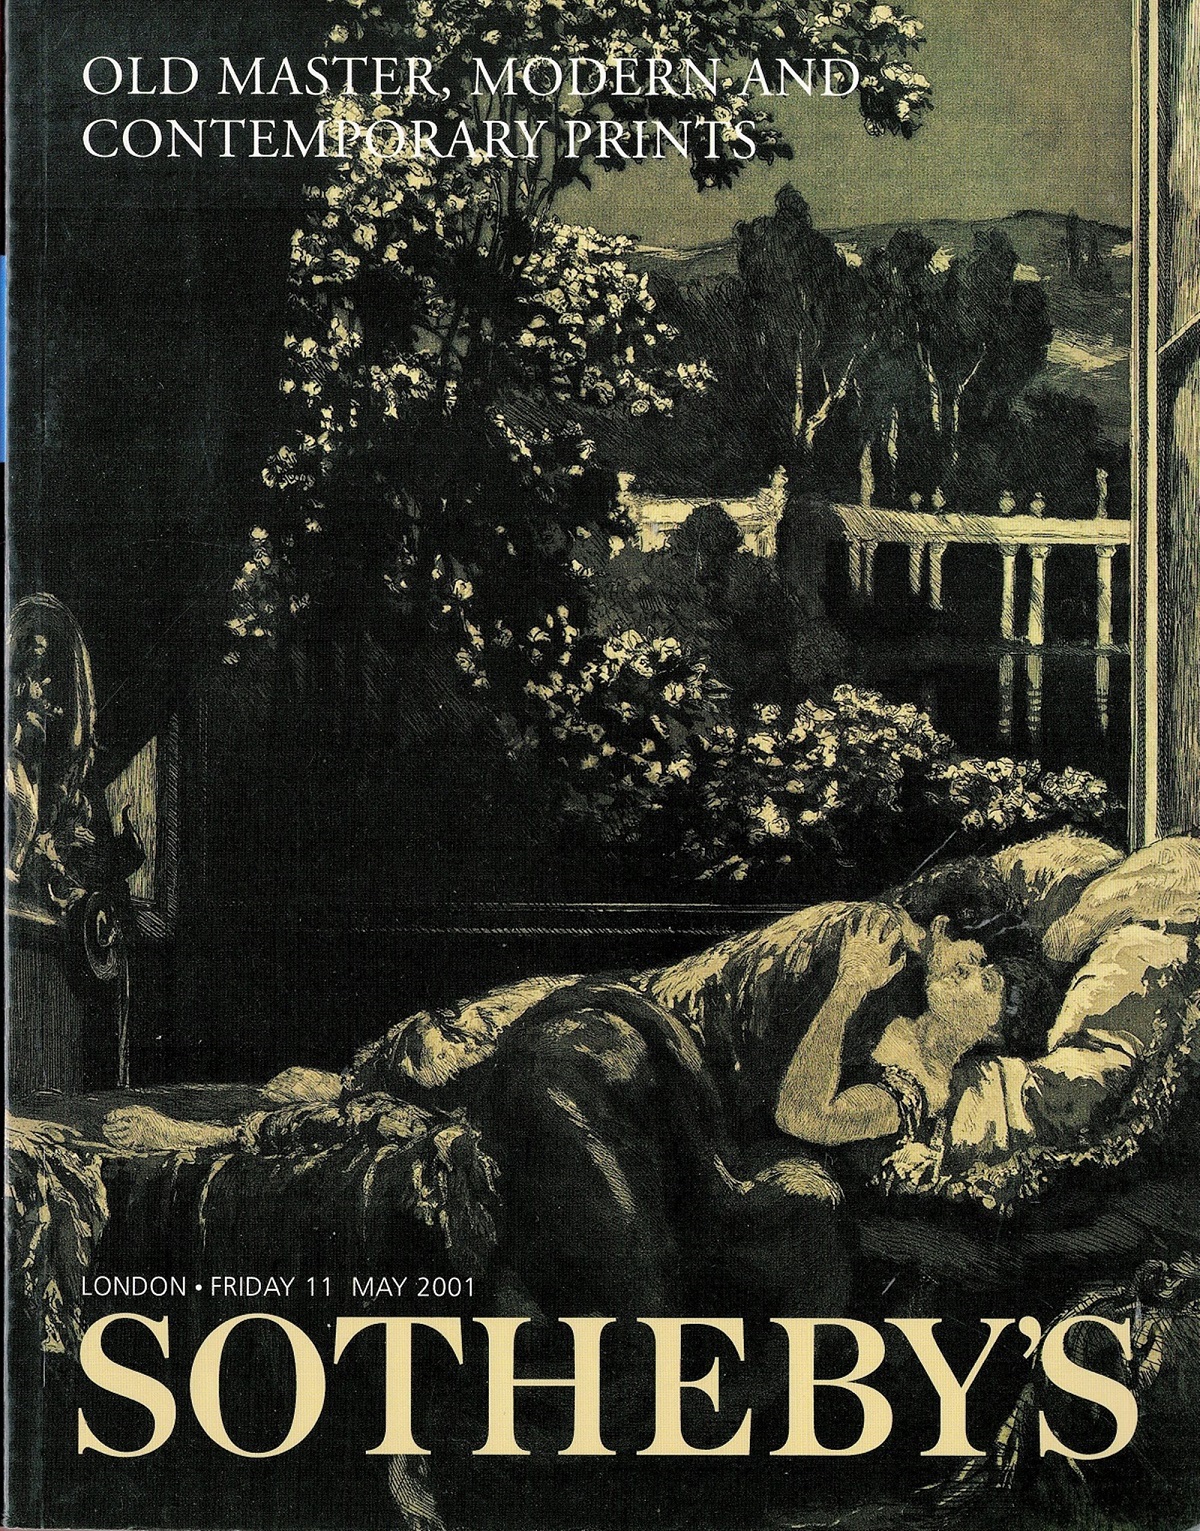 Sotheby's Old Master, Modern and Contemporary Prints Softback Book 2001 First Edition published by - Image 2 of 4